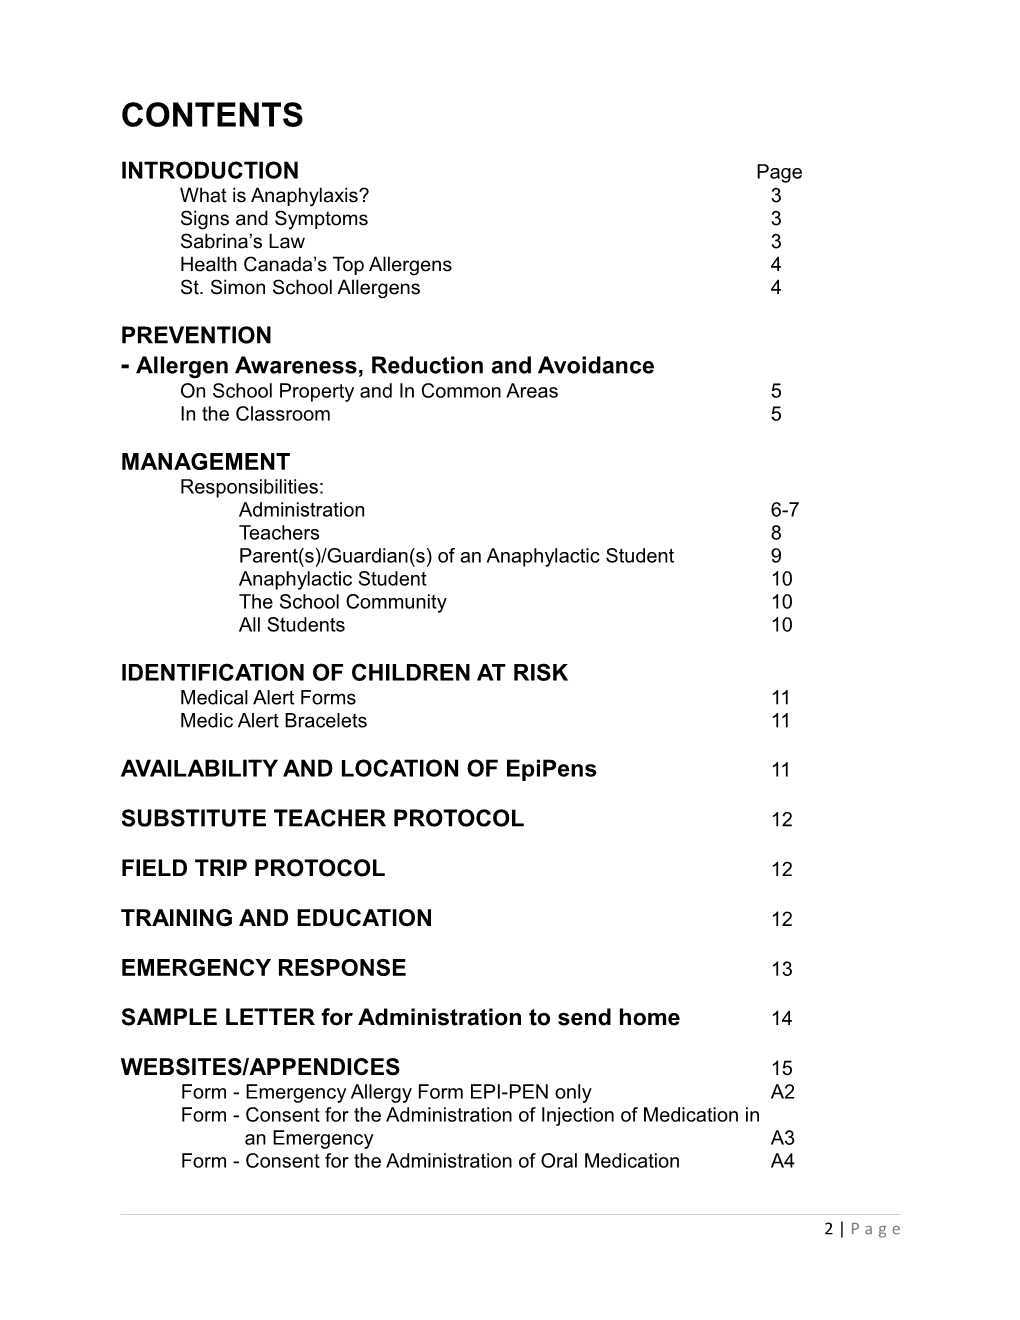 A Copy of the Anaphylaxis Prevention and Management Plan Is Kept